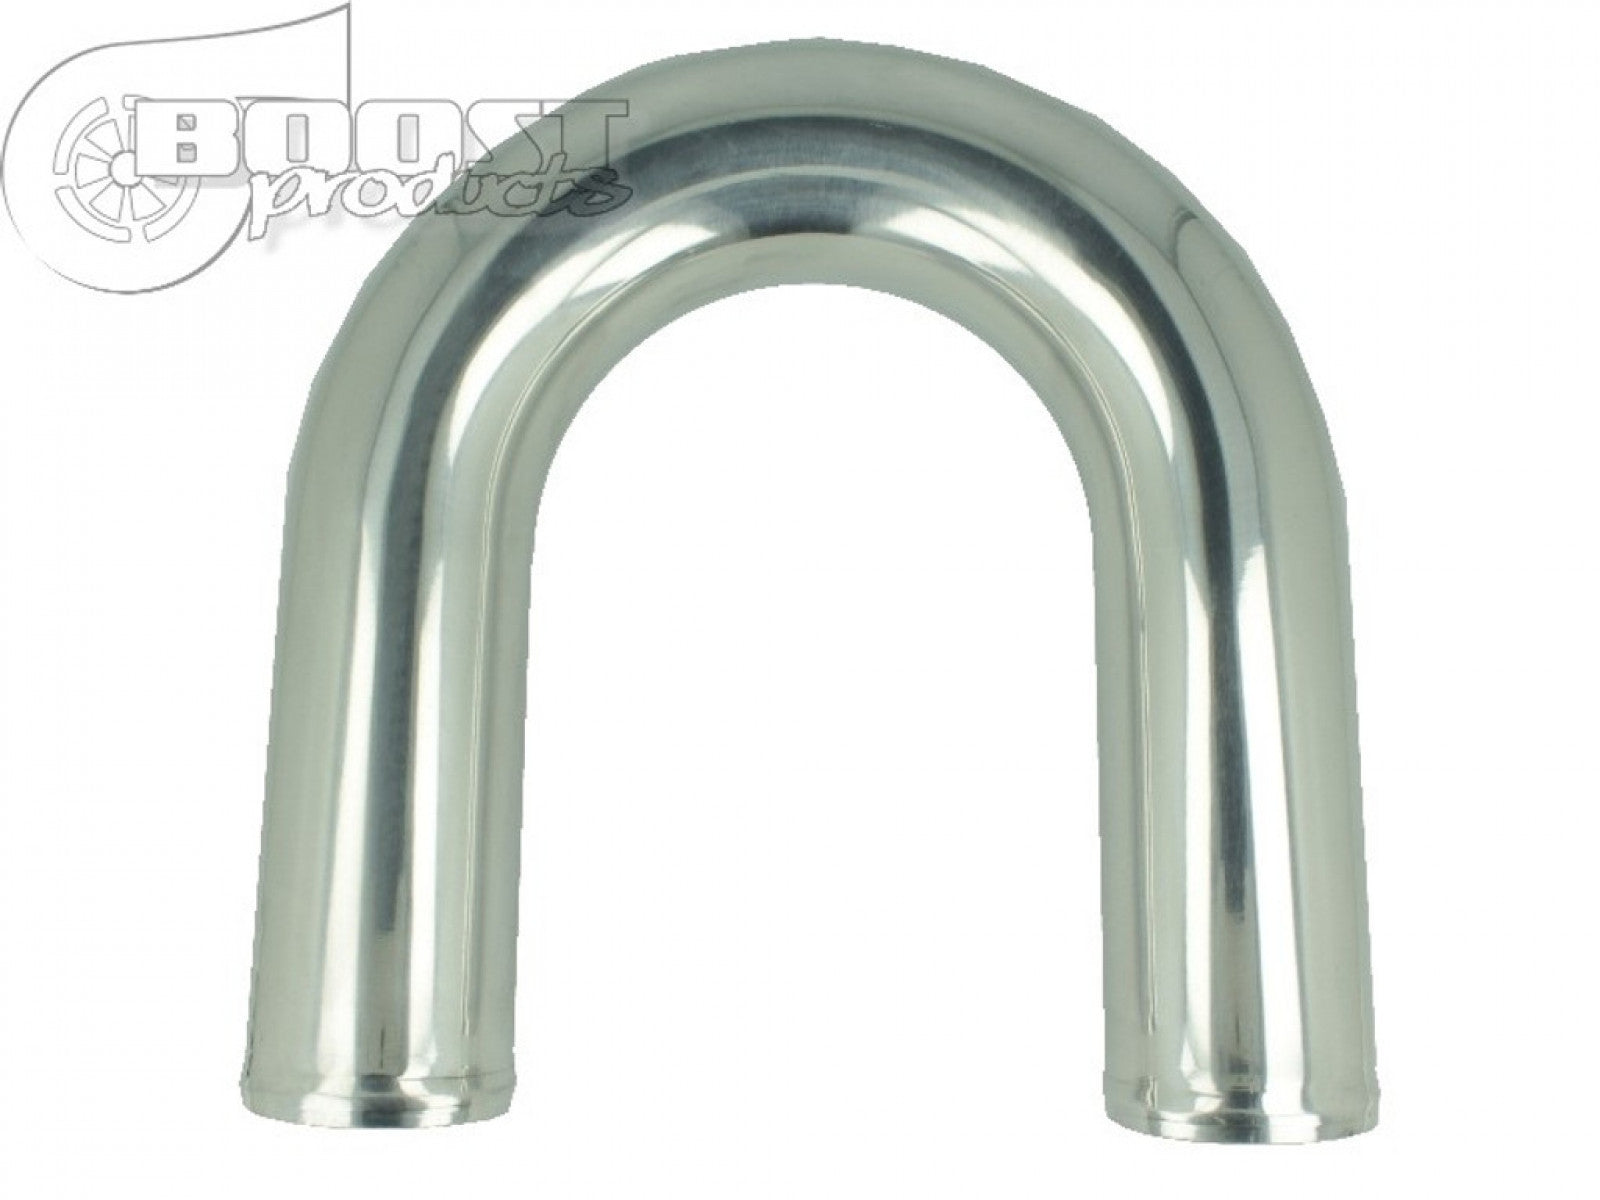 BOOST Products Aluminum Elbow 180 Degrees with 70mm (2-3/4") OD, Mandrel Bent, Polished